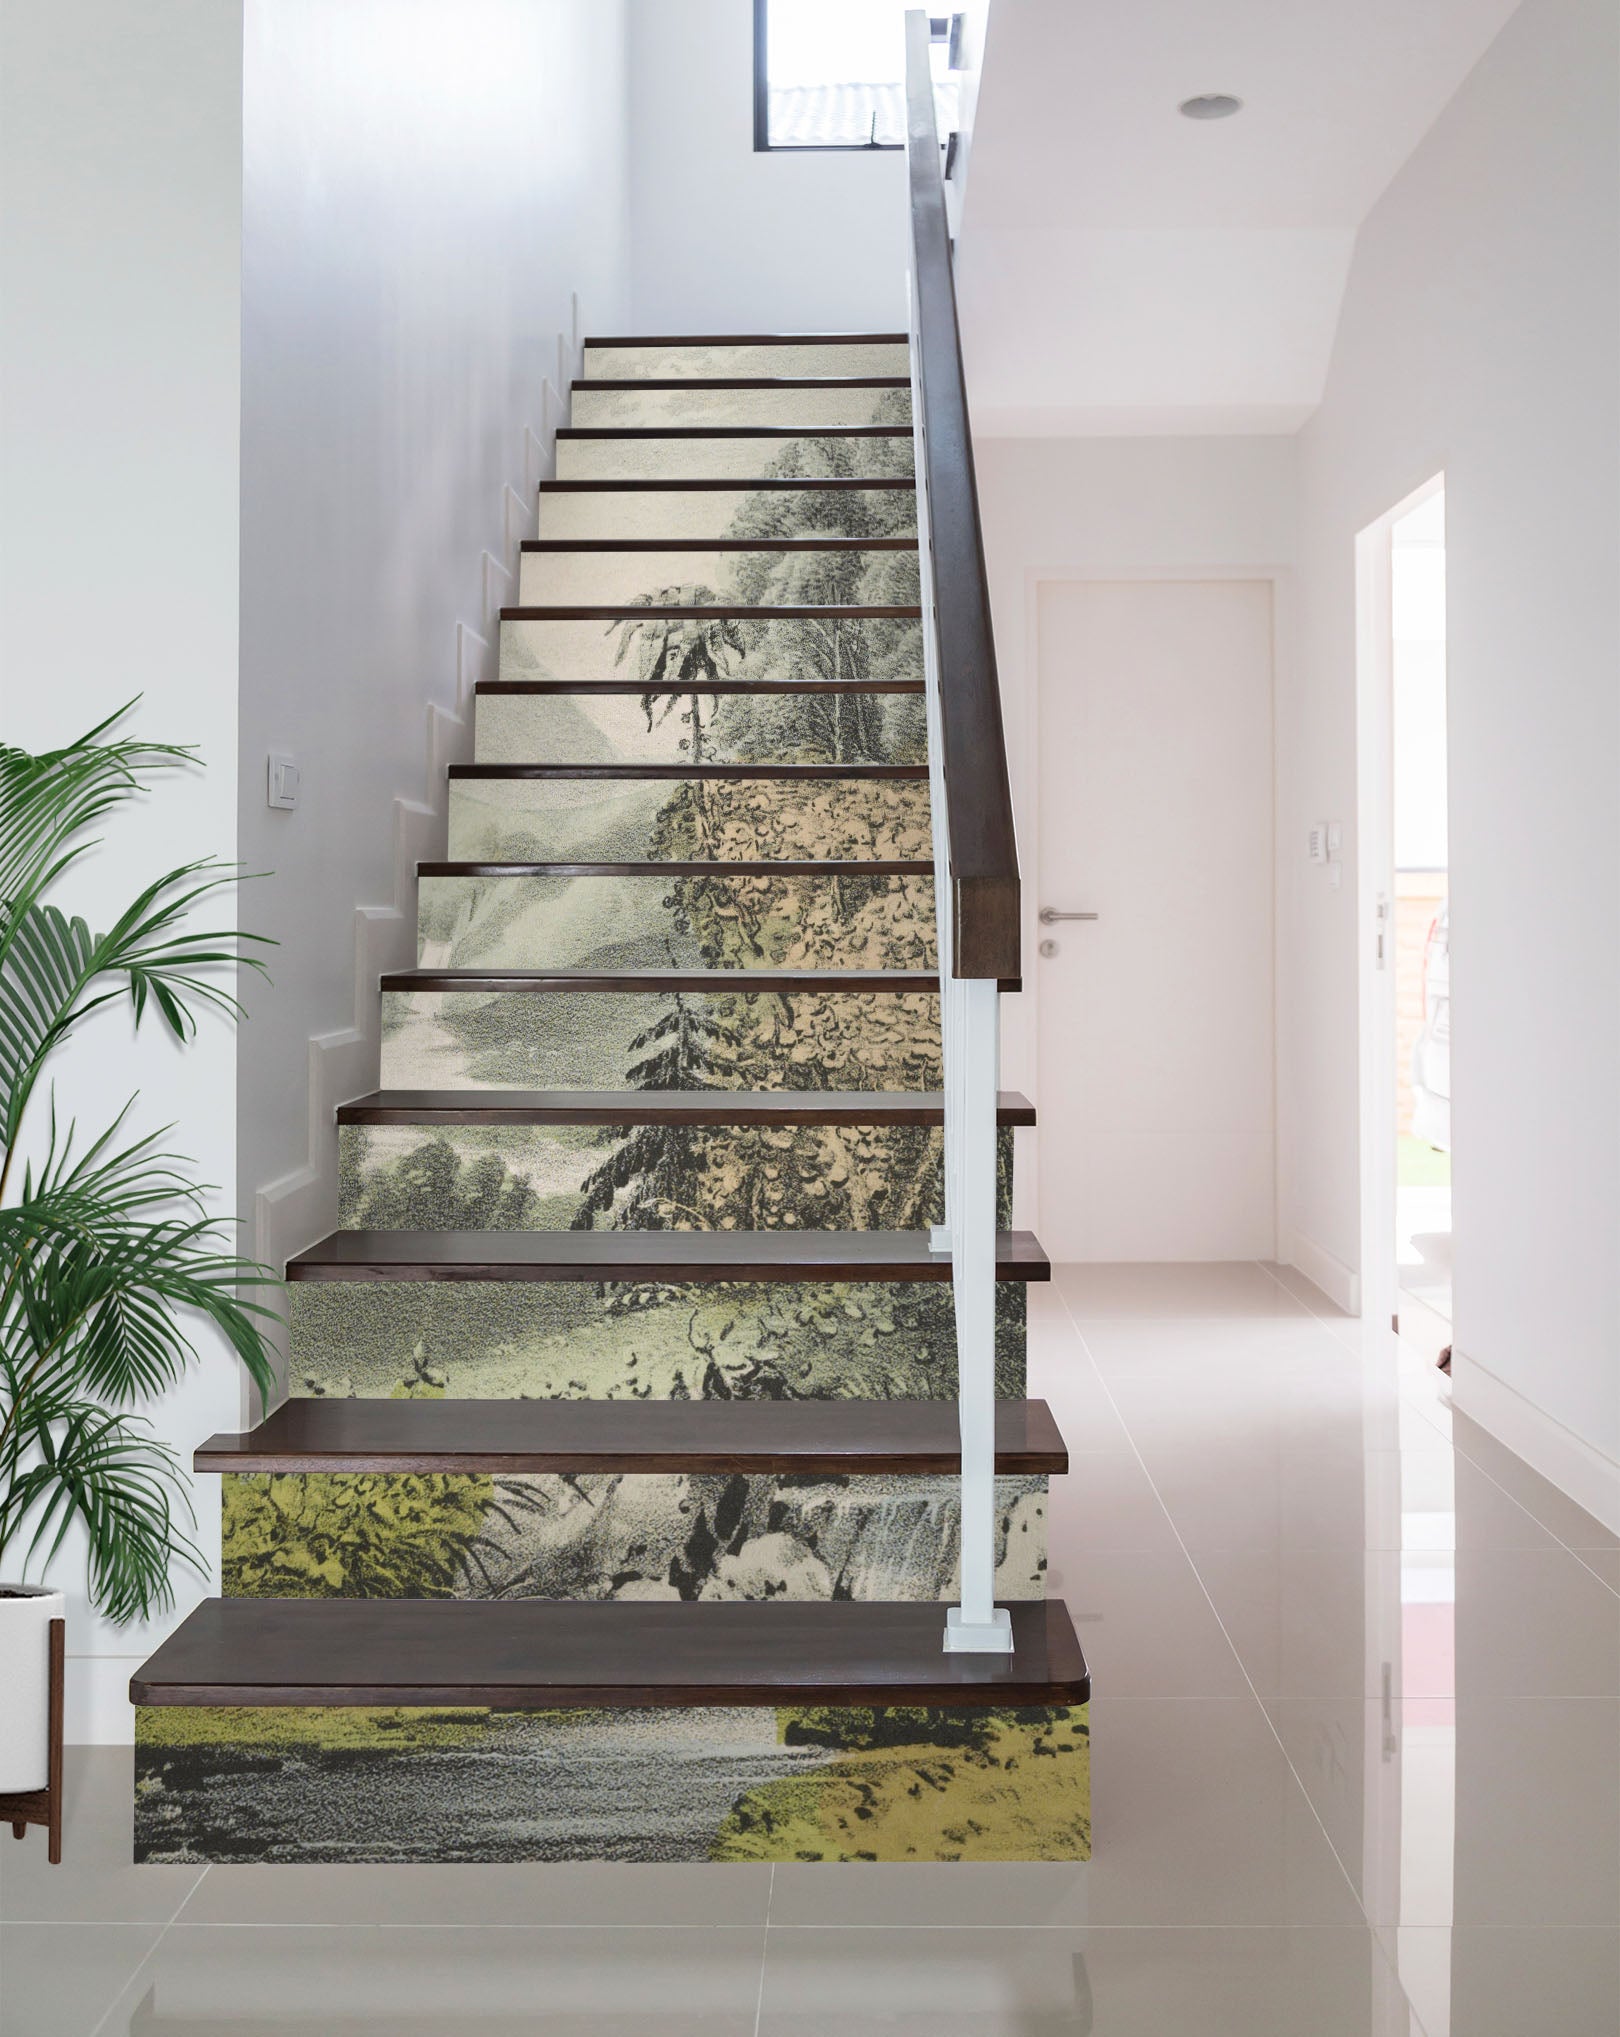 3D Landscape 109172 Andrea Haase Stair Risers